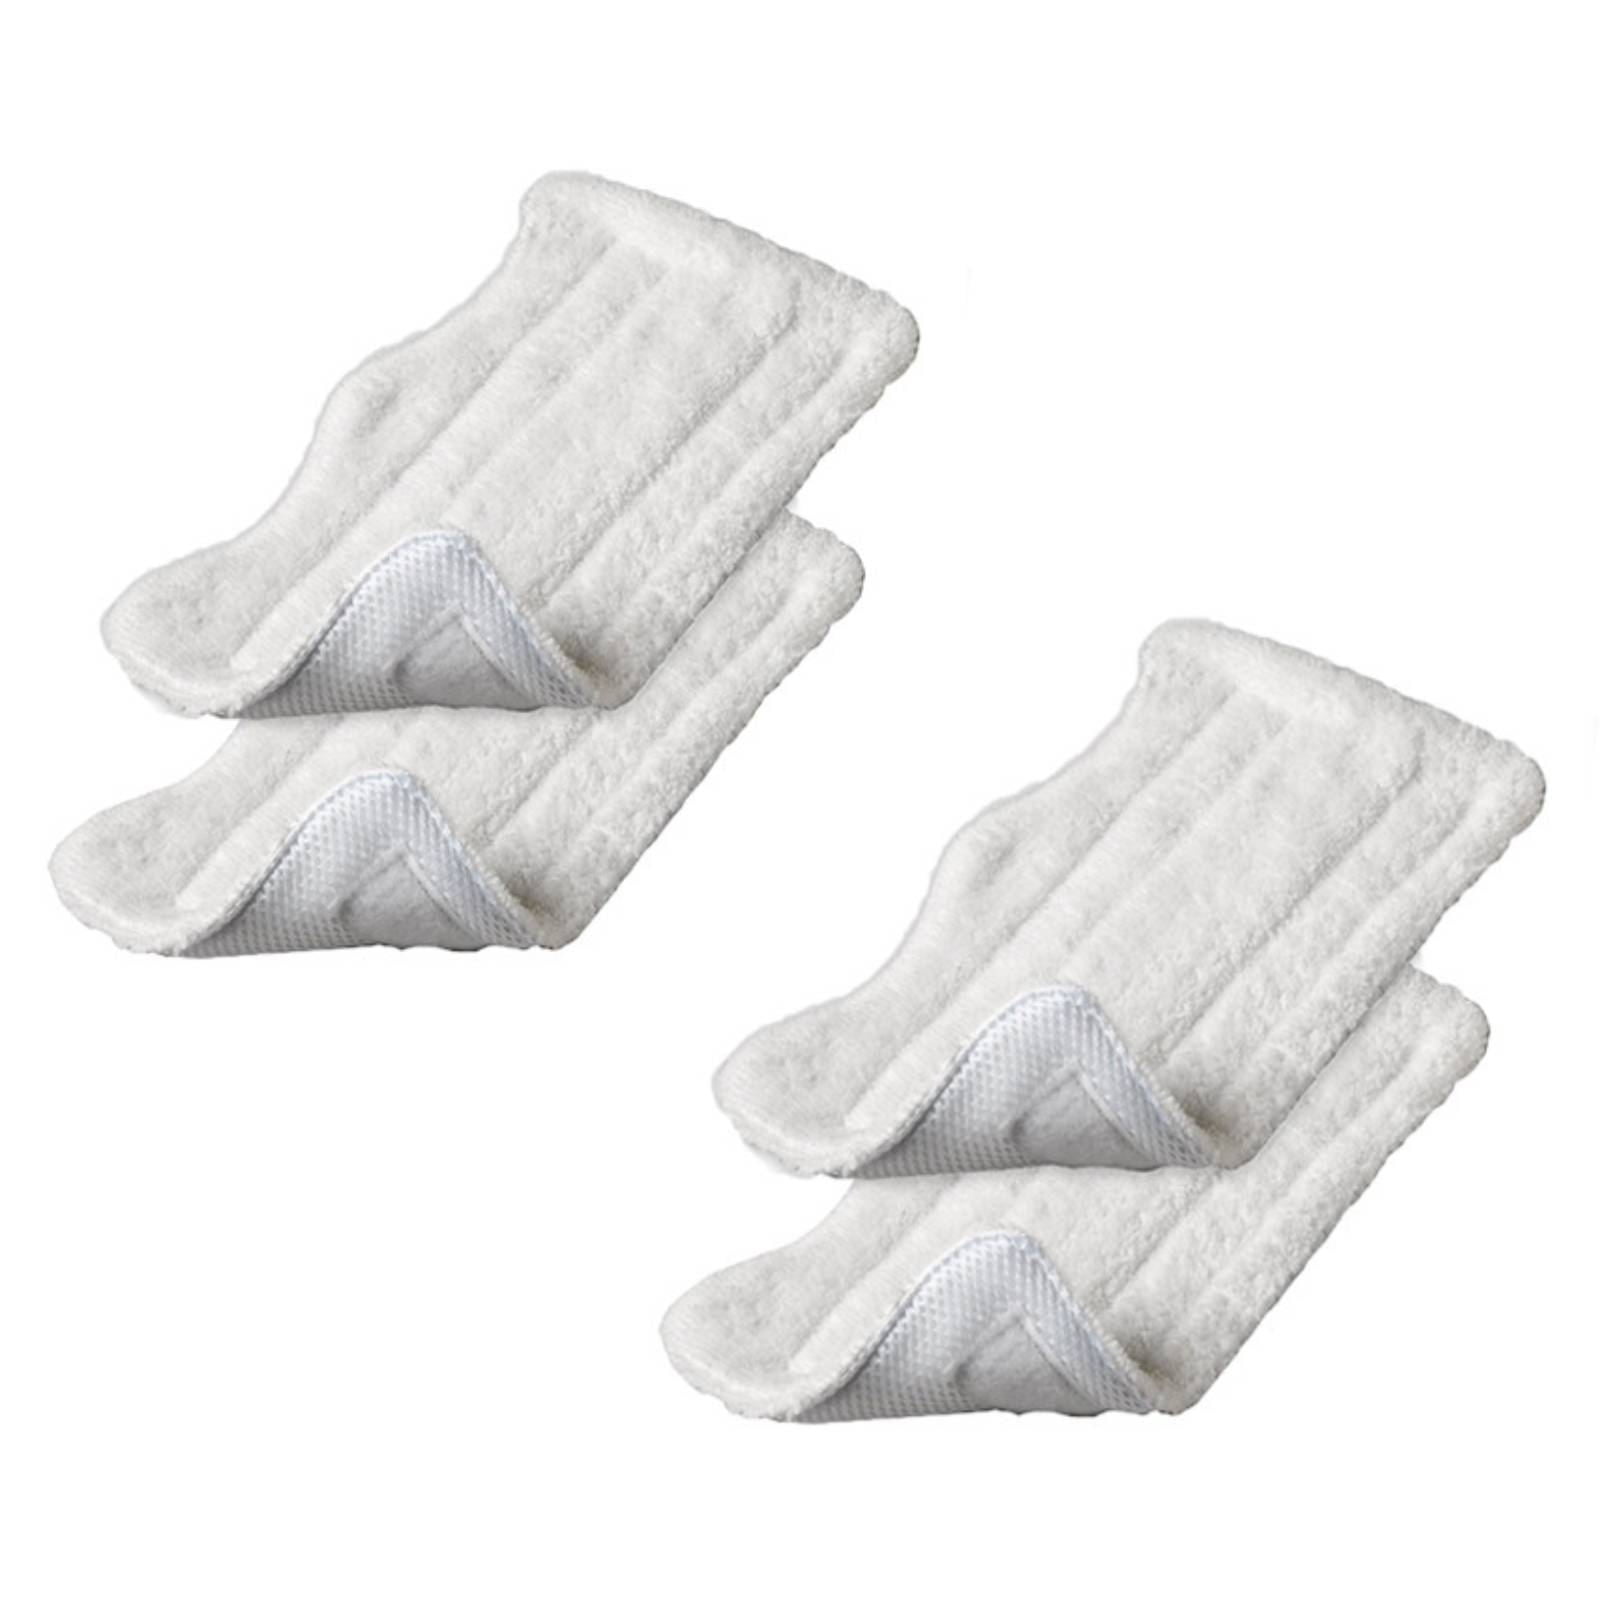 Clean Co Steam Mop Pads for Euro Pro Shark Microfiber Pad Replacement 8,4 or 1 